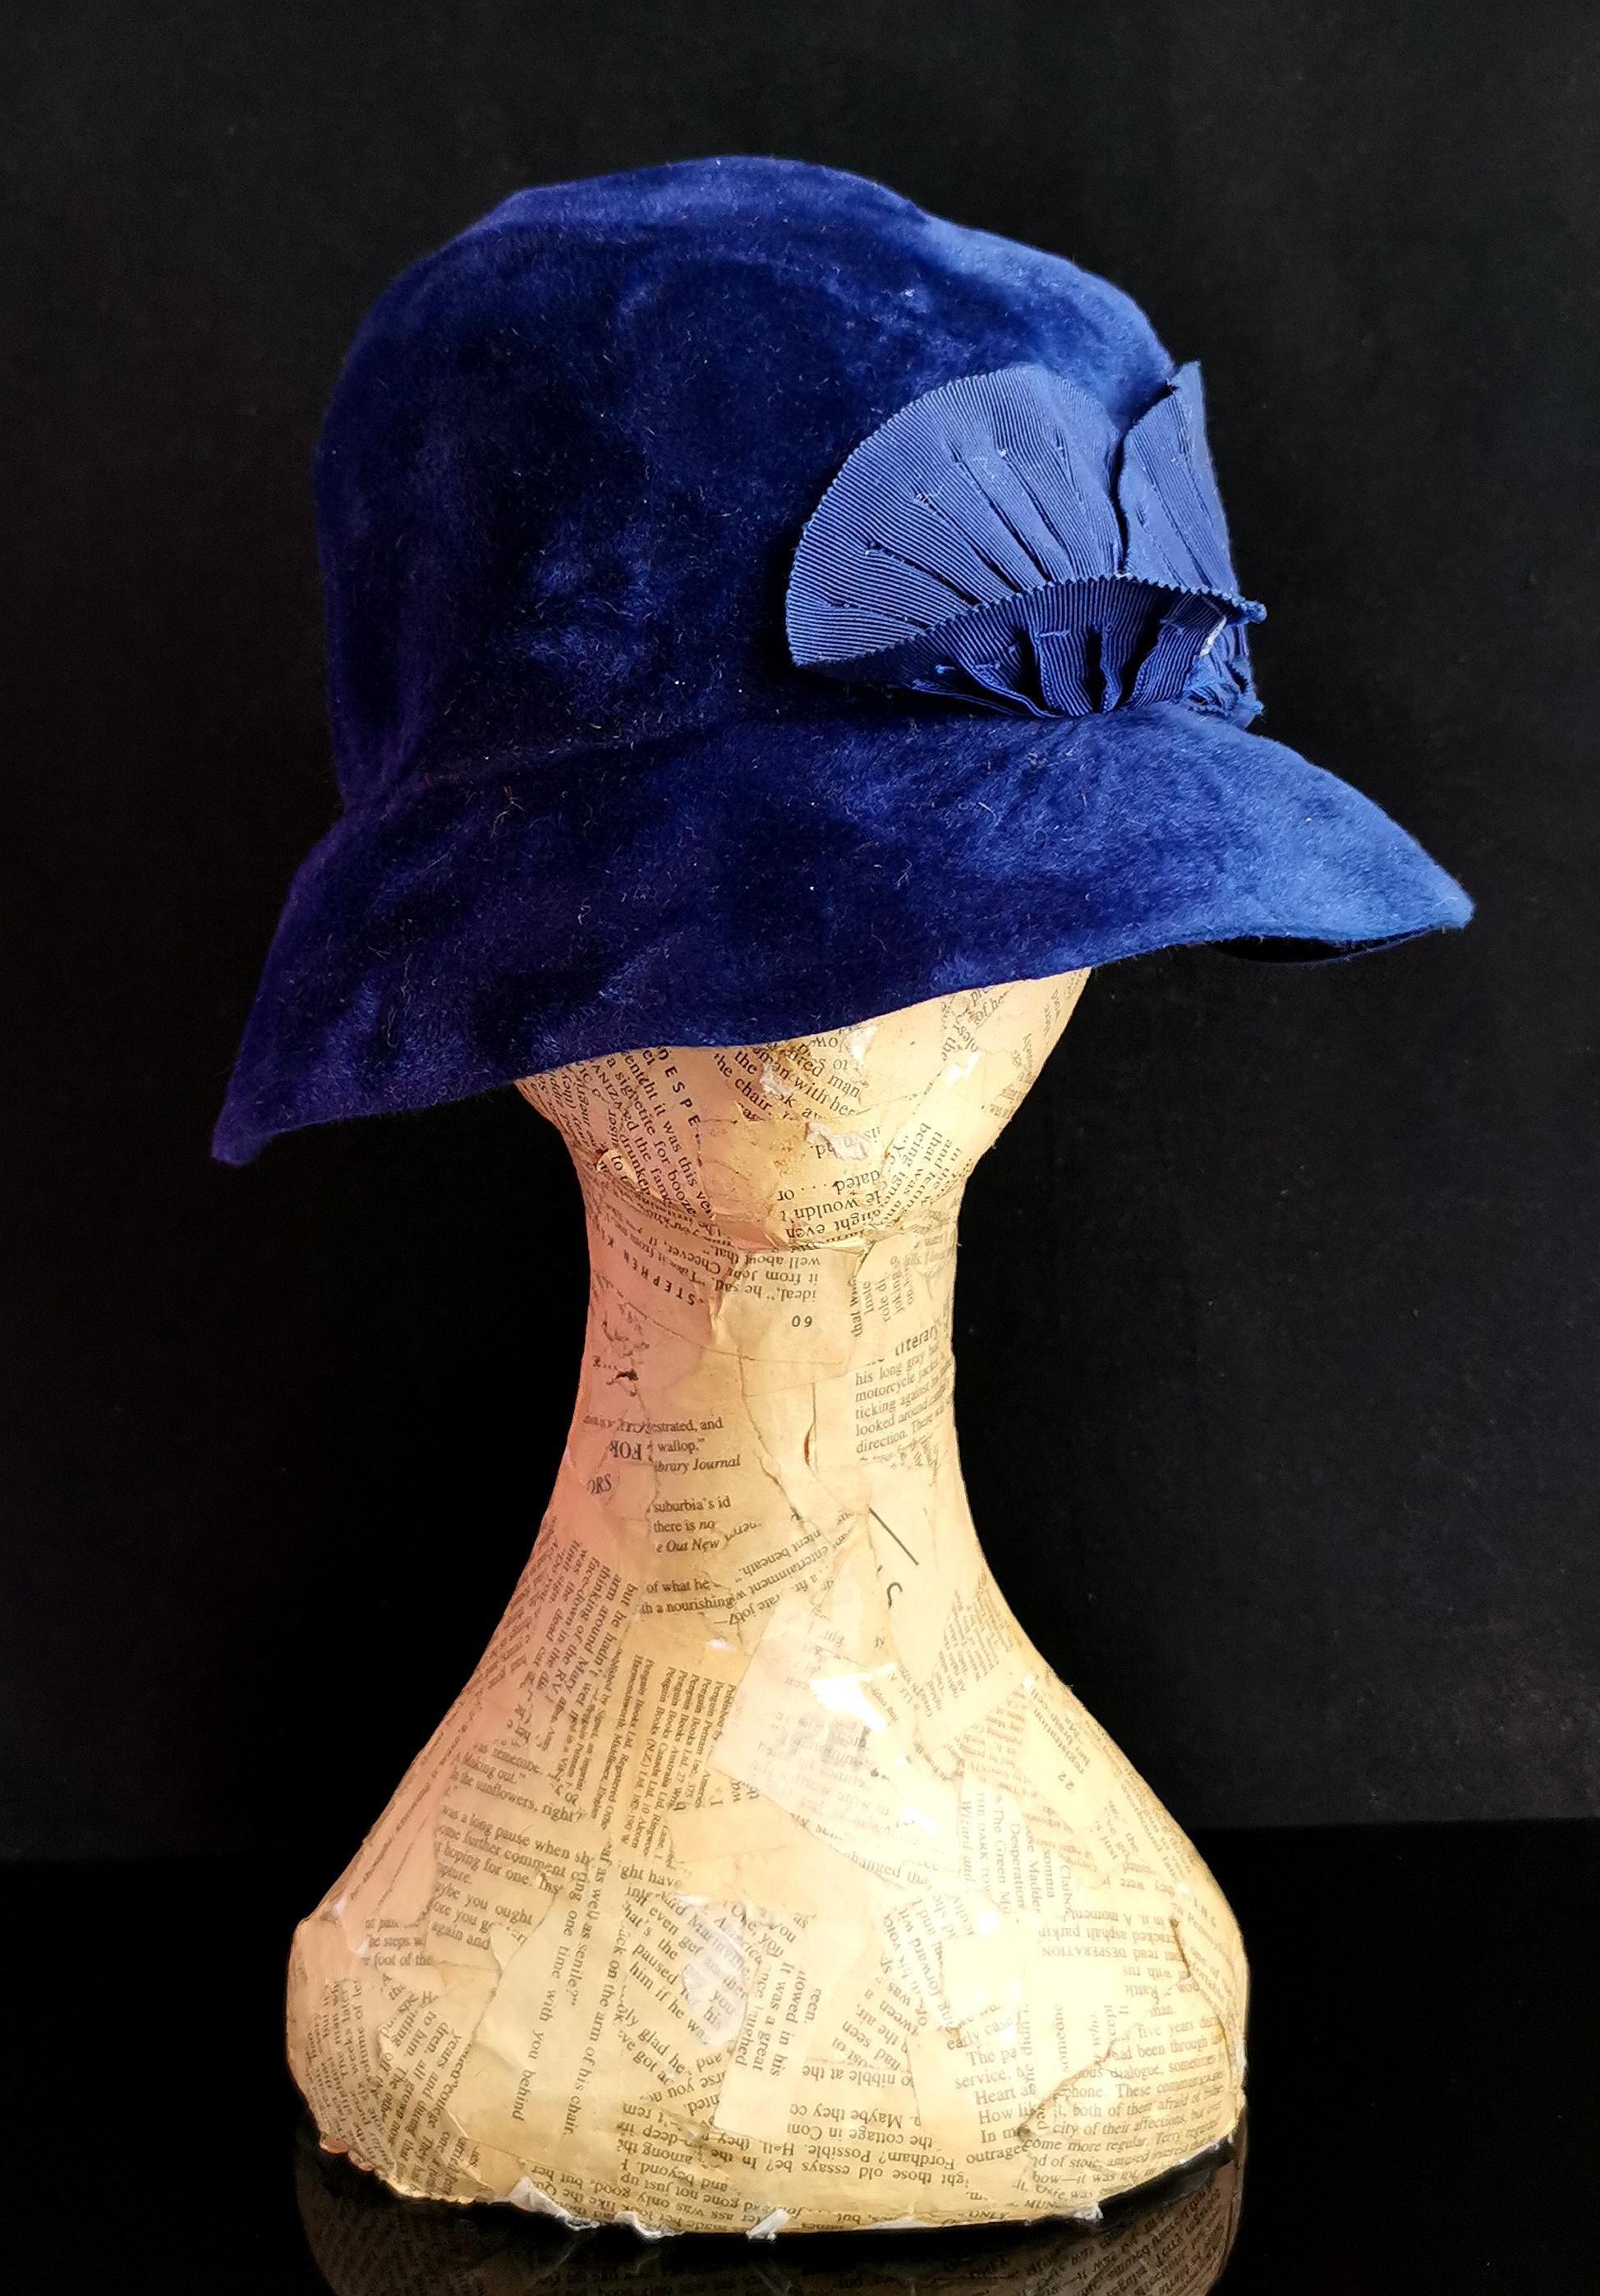 A beautiful vintage late 1920s era cloche hat.

A deep bucket style cloche hat with a short floppy brim in a rich cobalt blue.

The hat has a woven half band with fanned detailing and this spans around one half of the hat.

It has a fairly long and